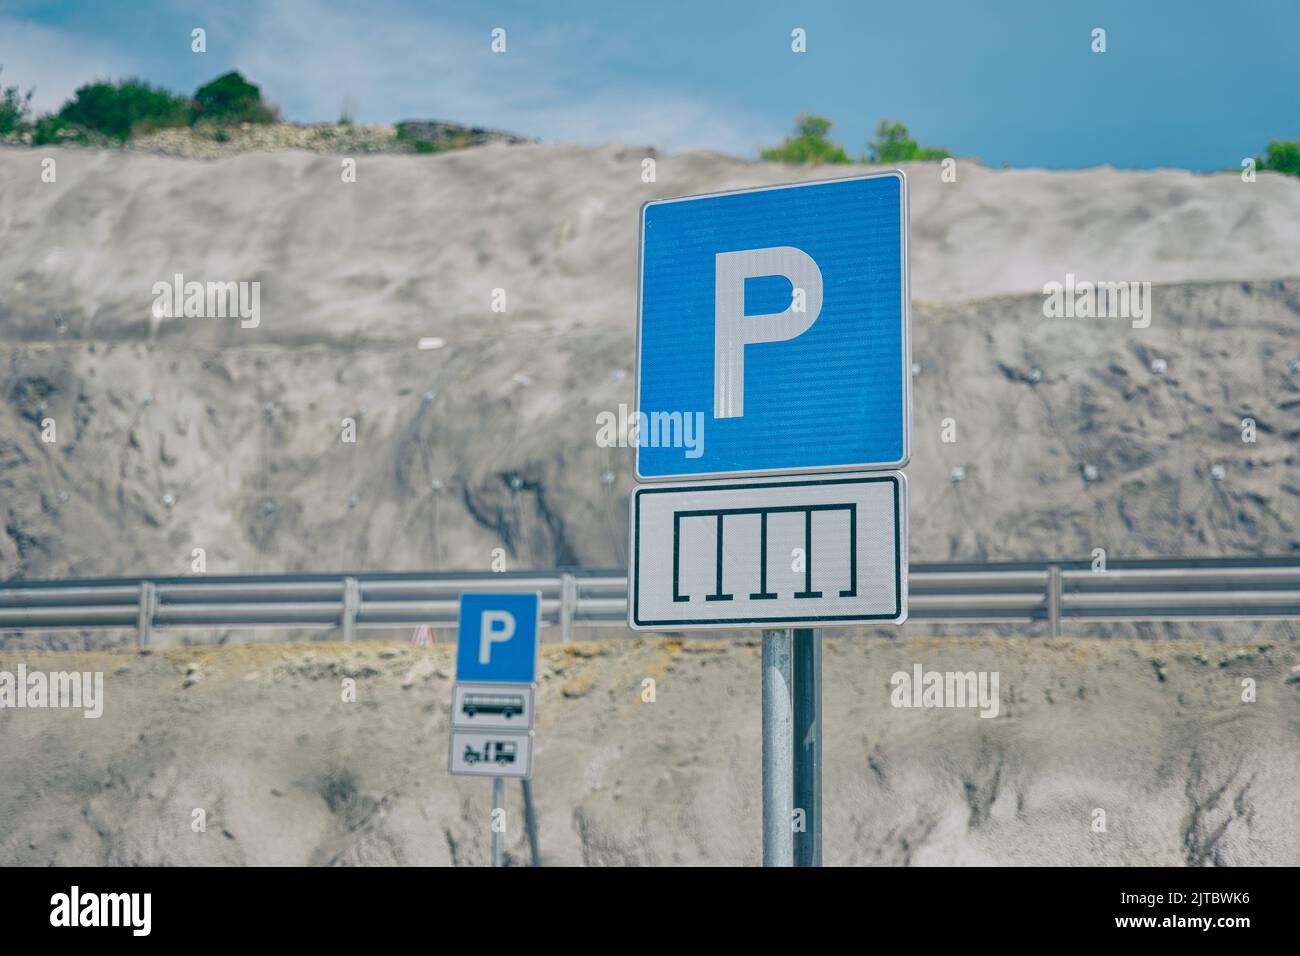 Parking of an expressway through a rural area Stock Photo